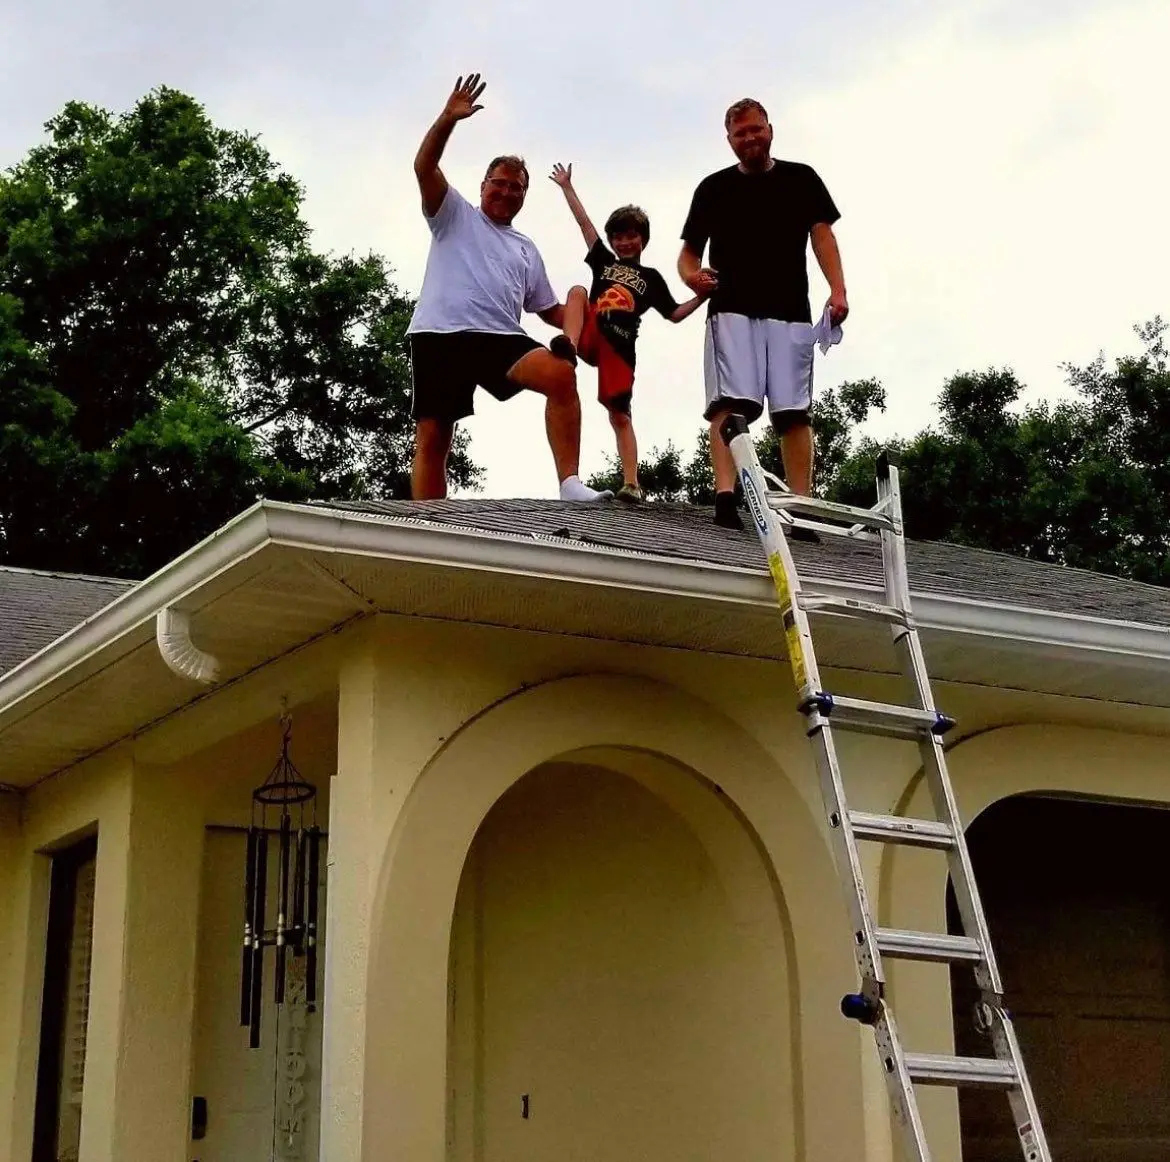 A group of people standing at the roof of a house